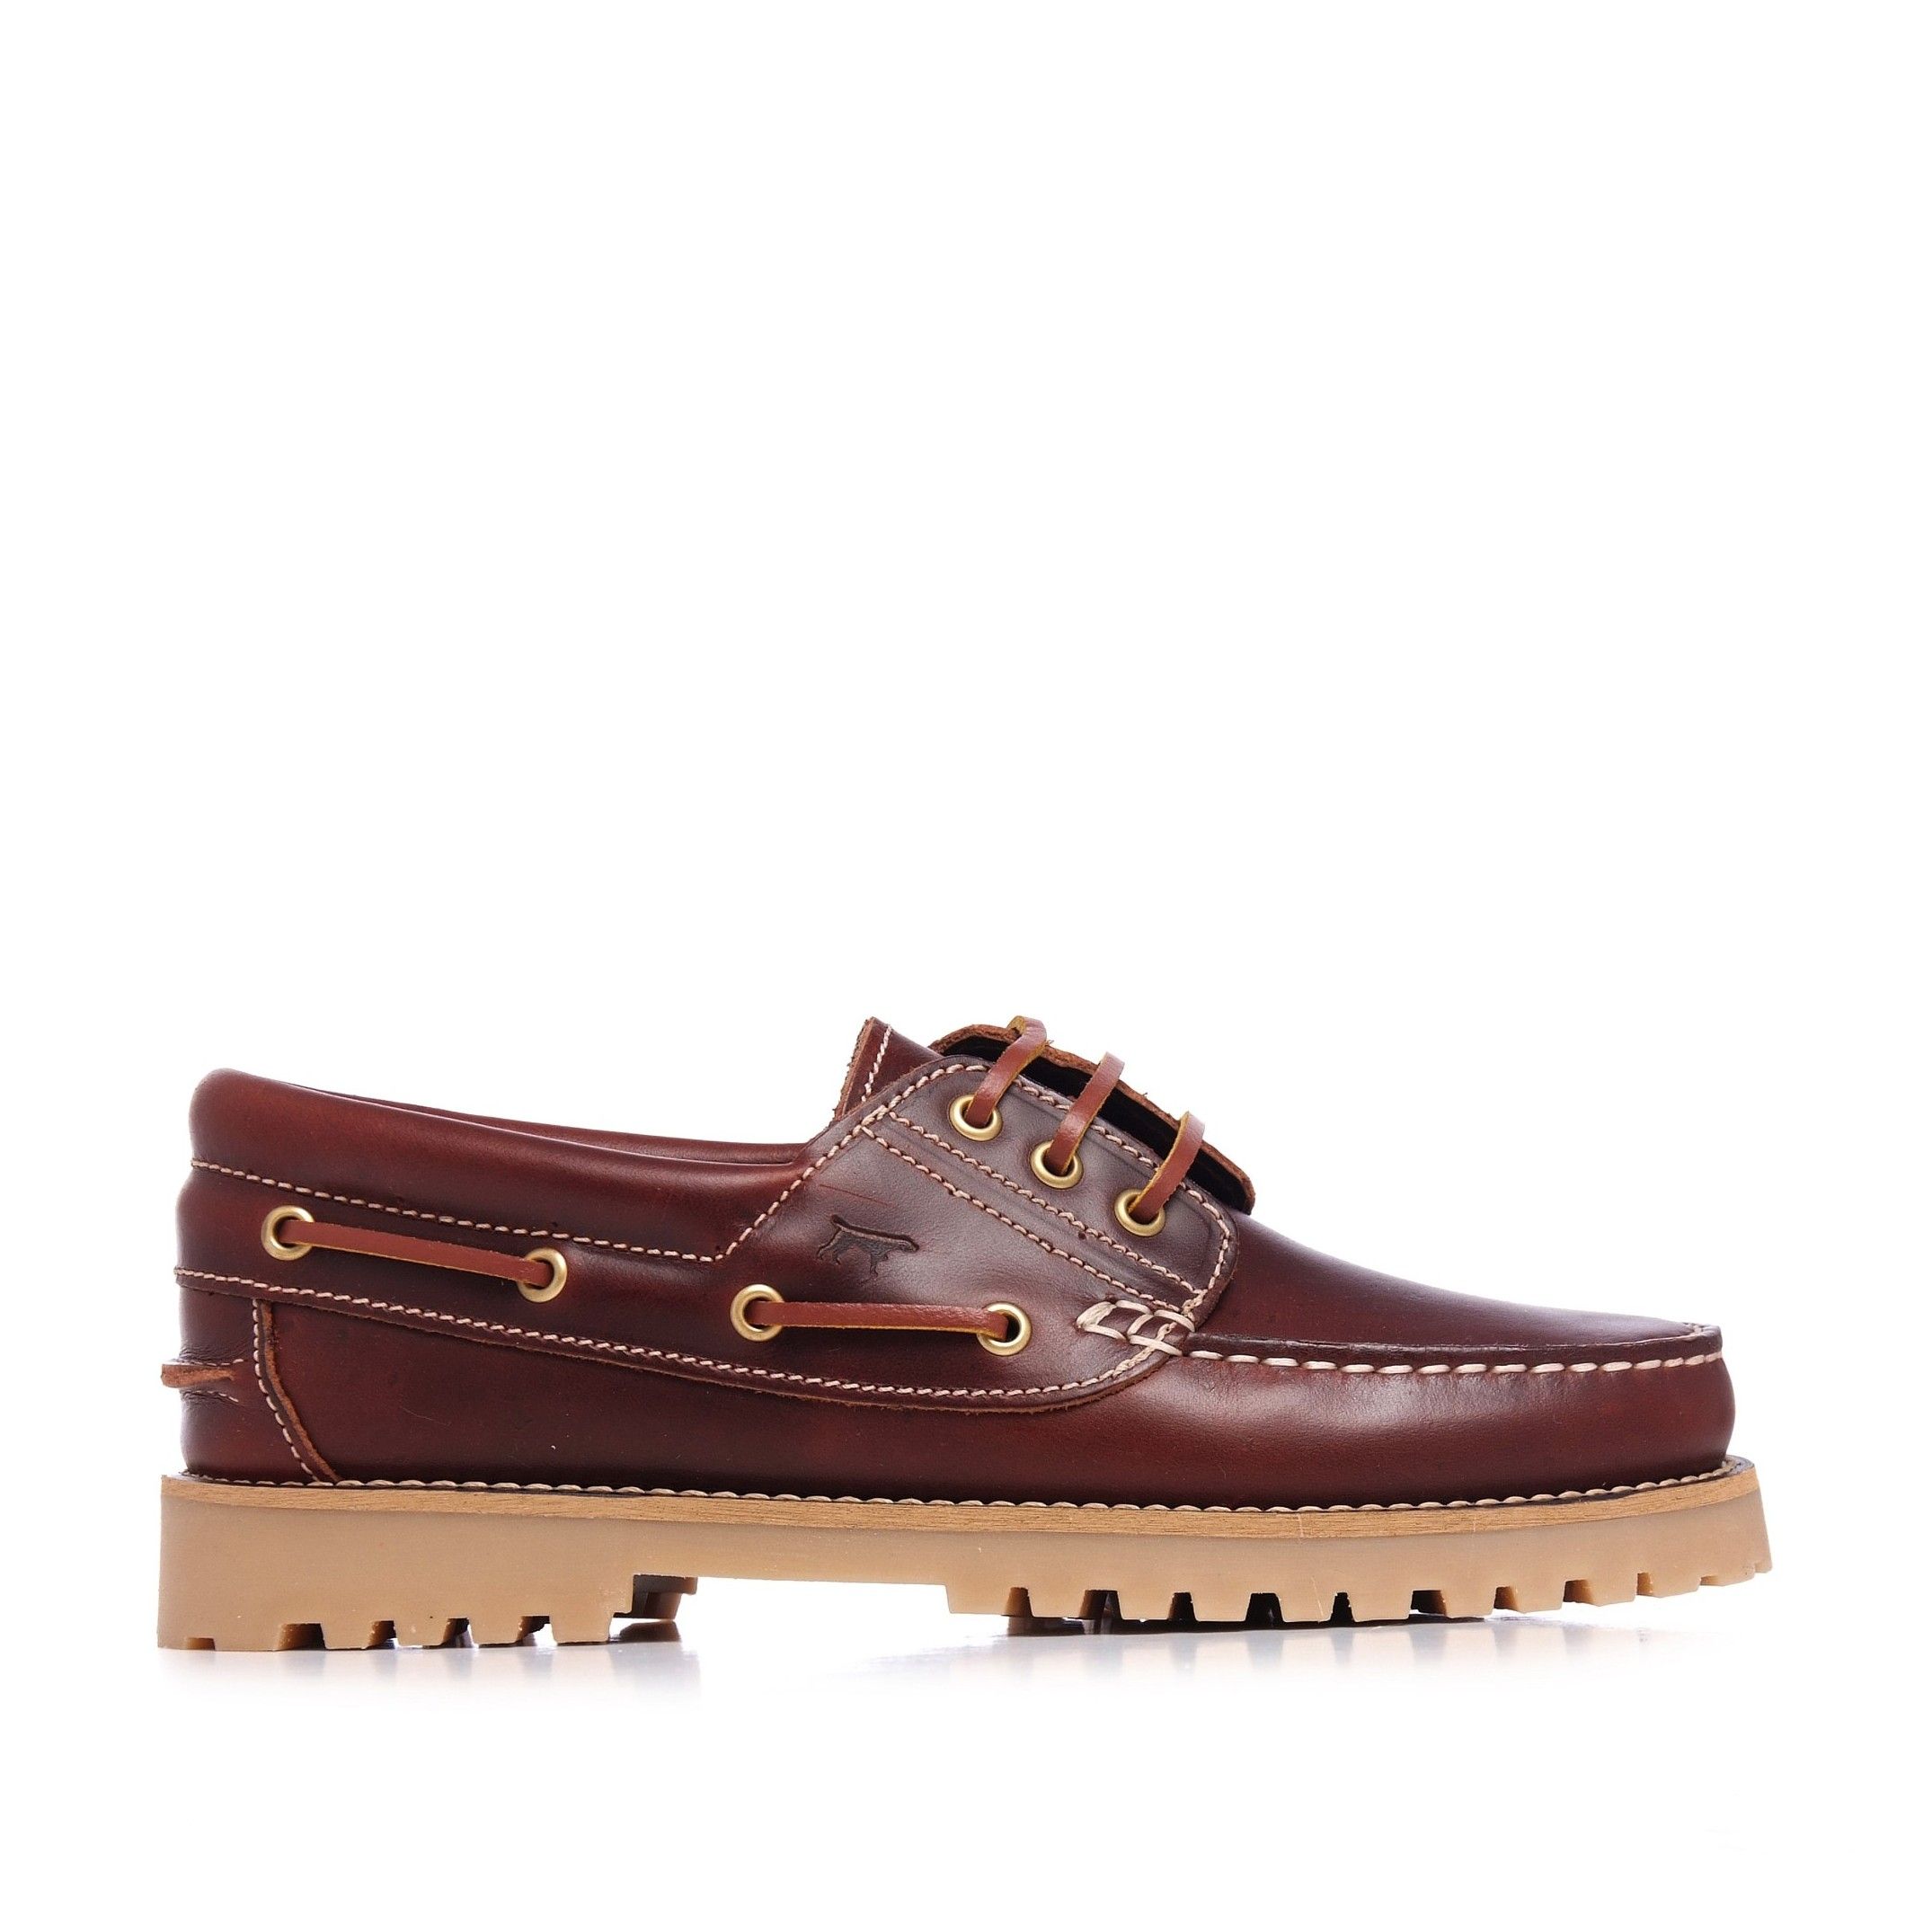 Leather Boat Shoes for Women Castellanisimos Comfort High Quality Shoe